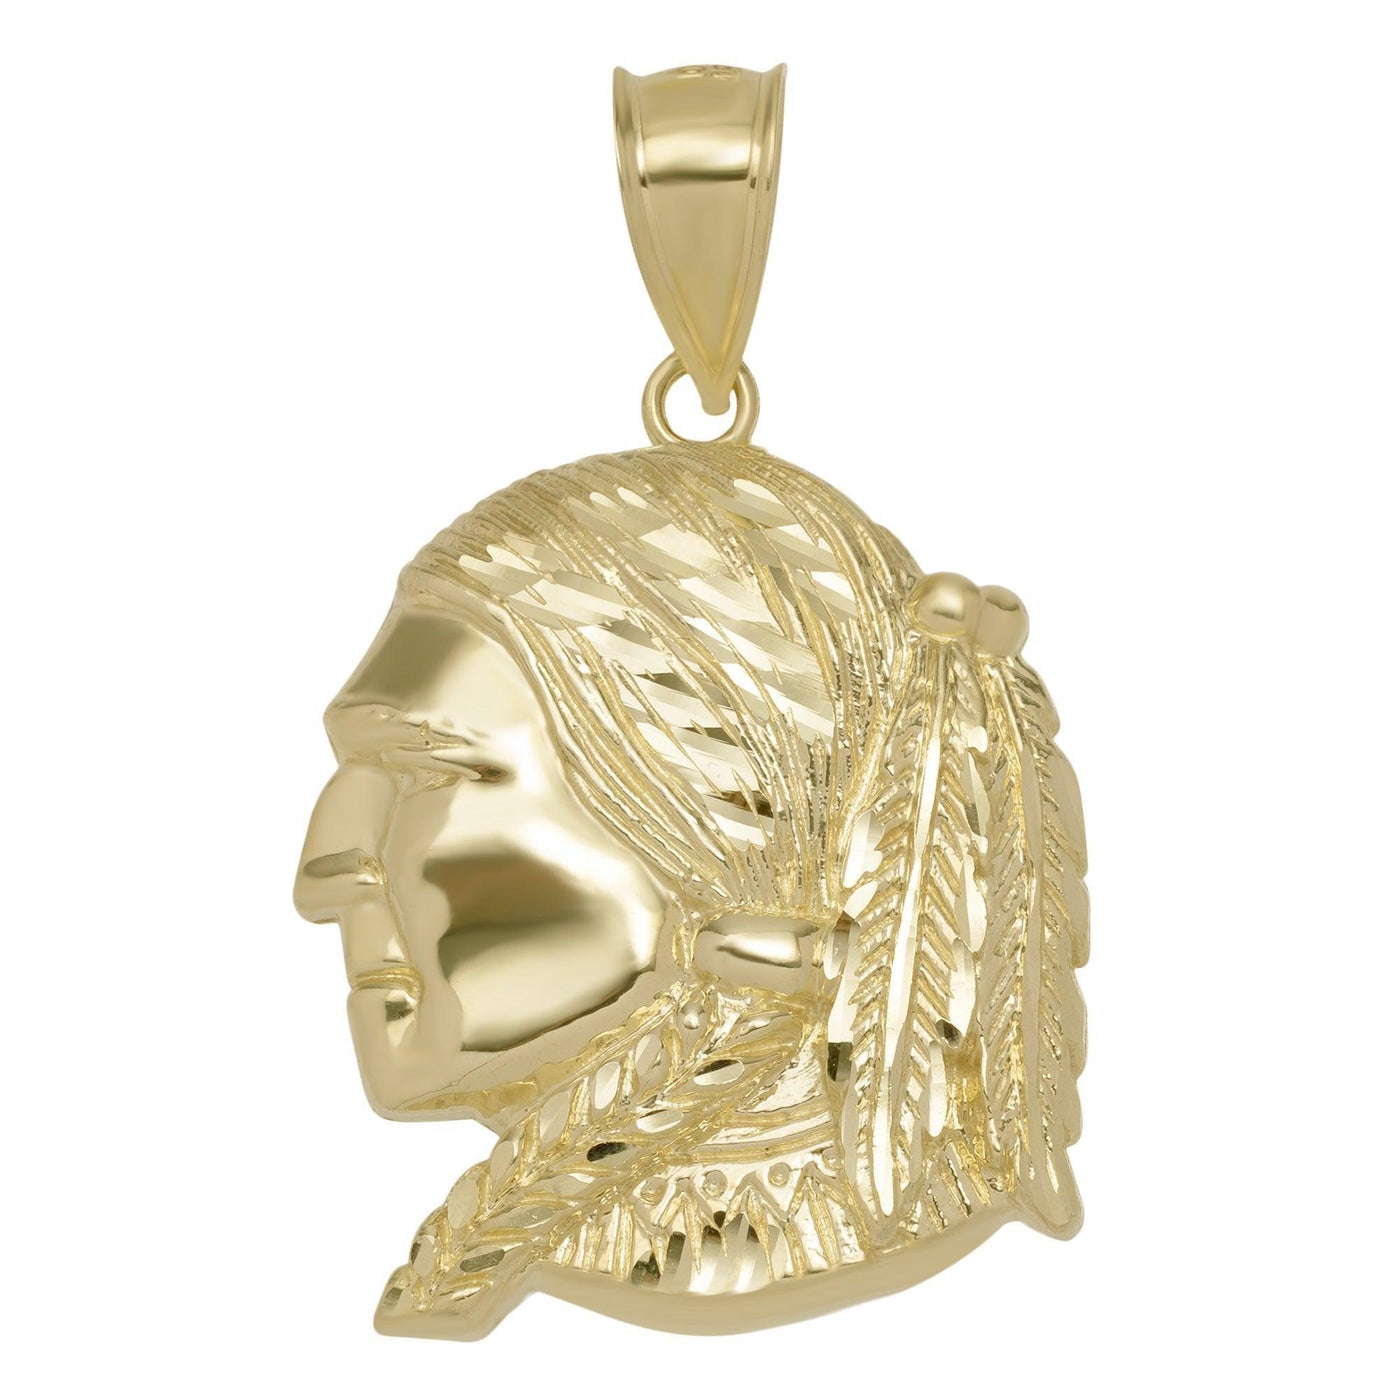 Textured Indian Chief Pendant Solid 10K Yellow Gold - bayamjewelry